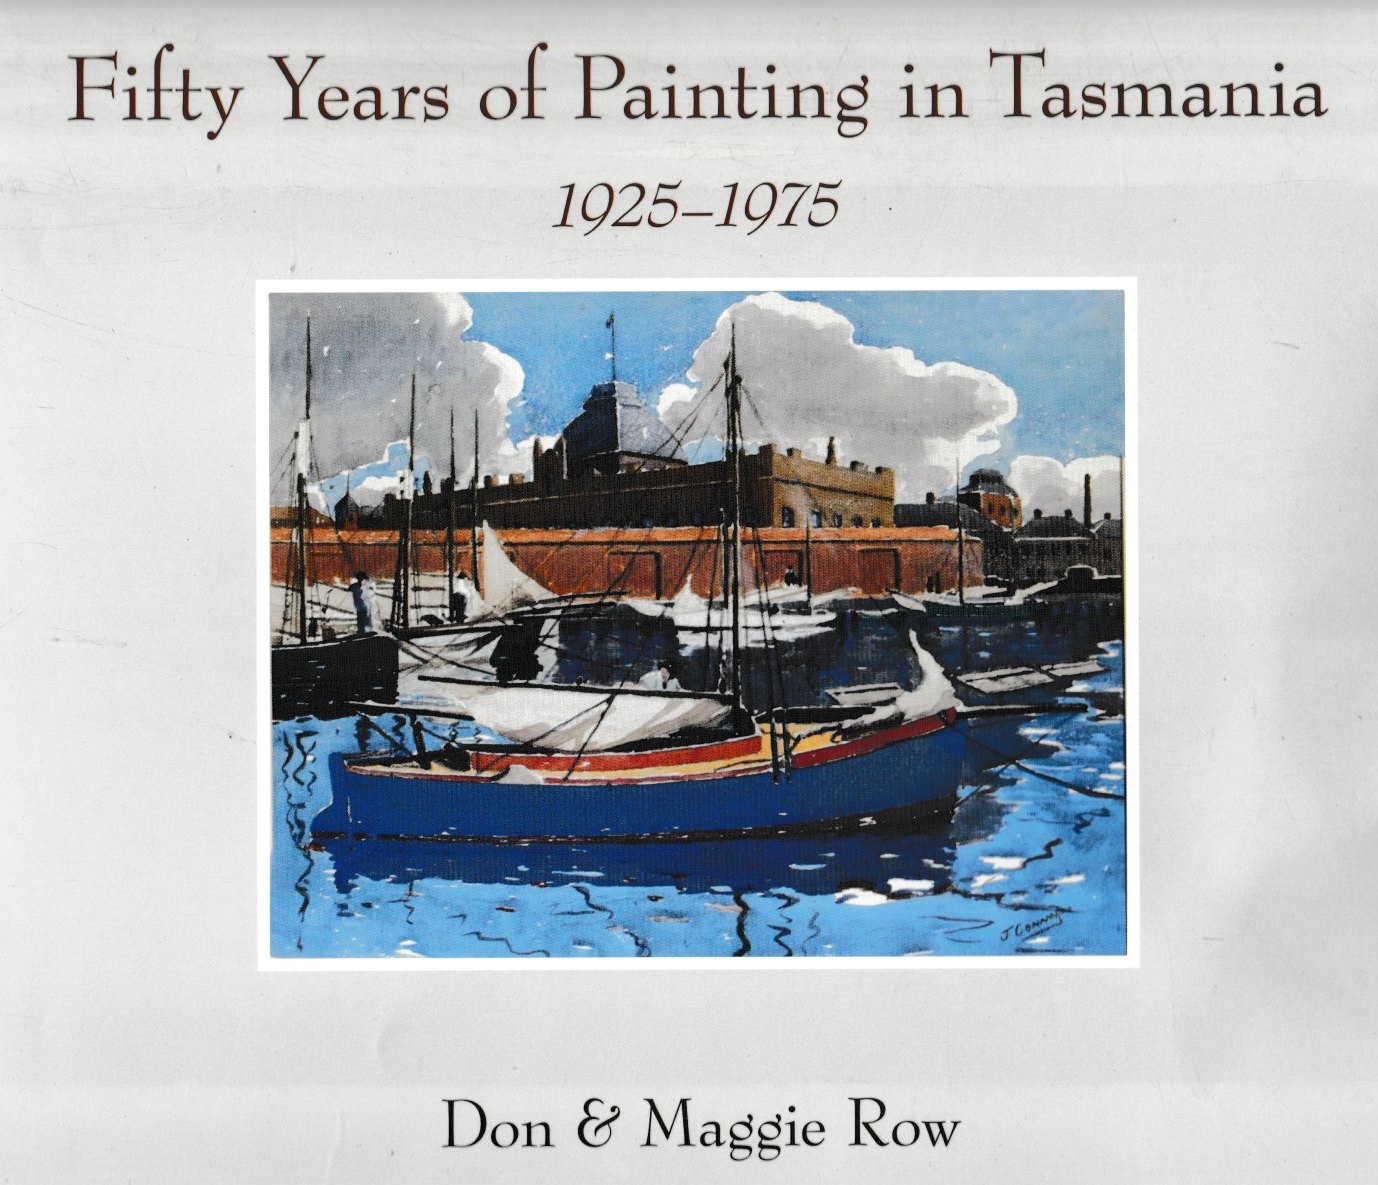 Fifty Years of Painting in Tasmania 1925-1975